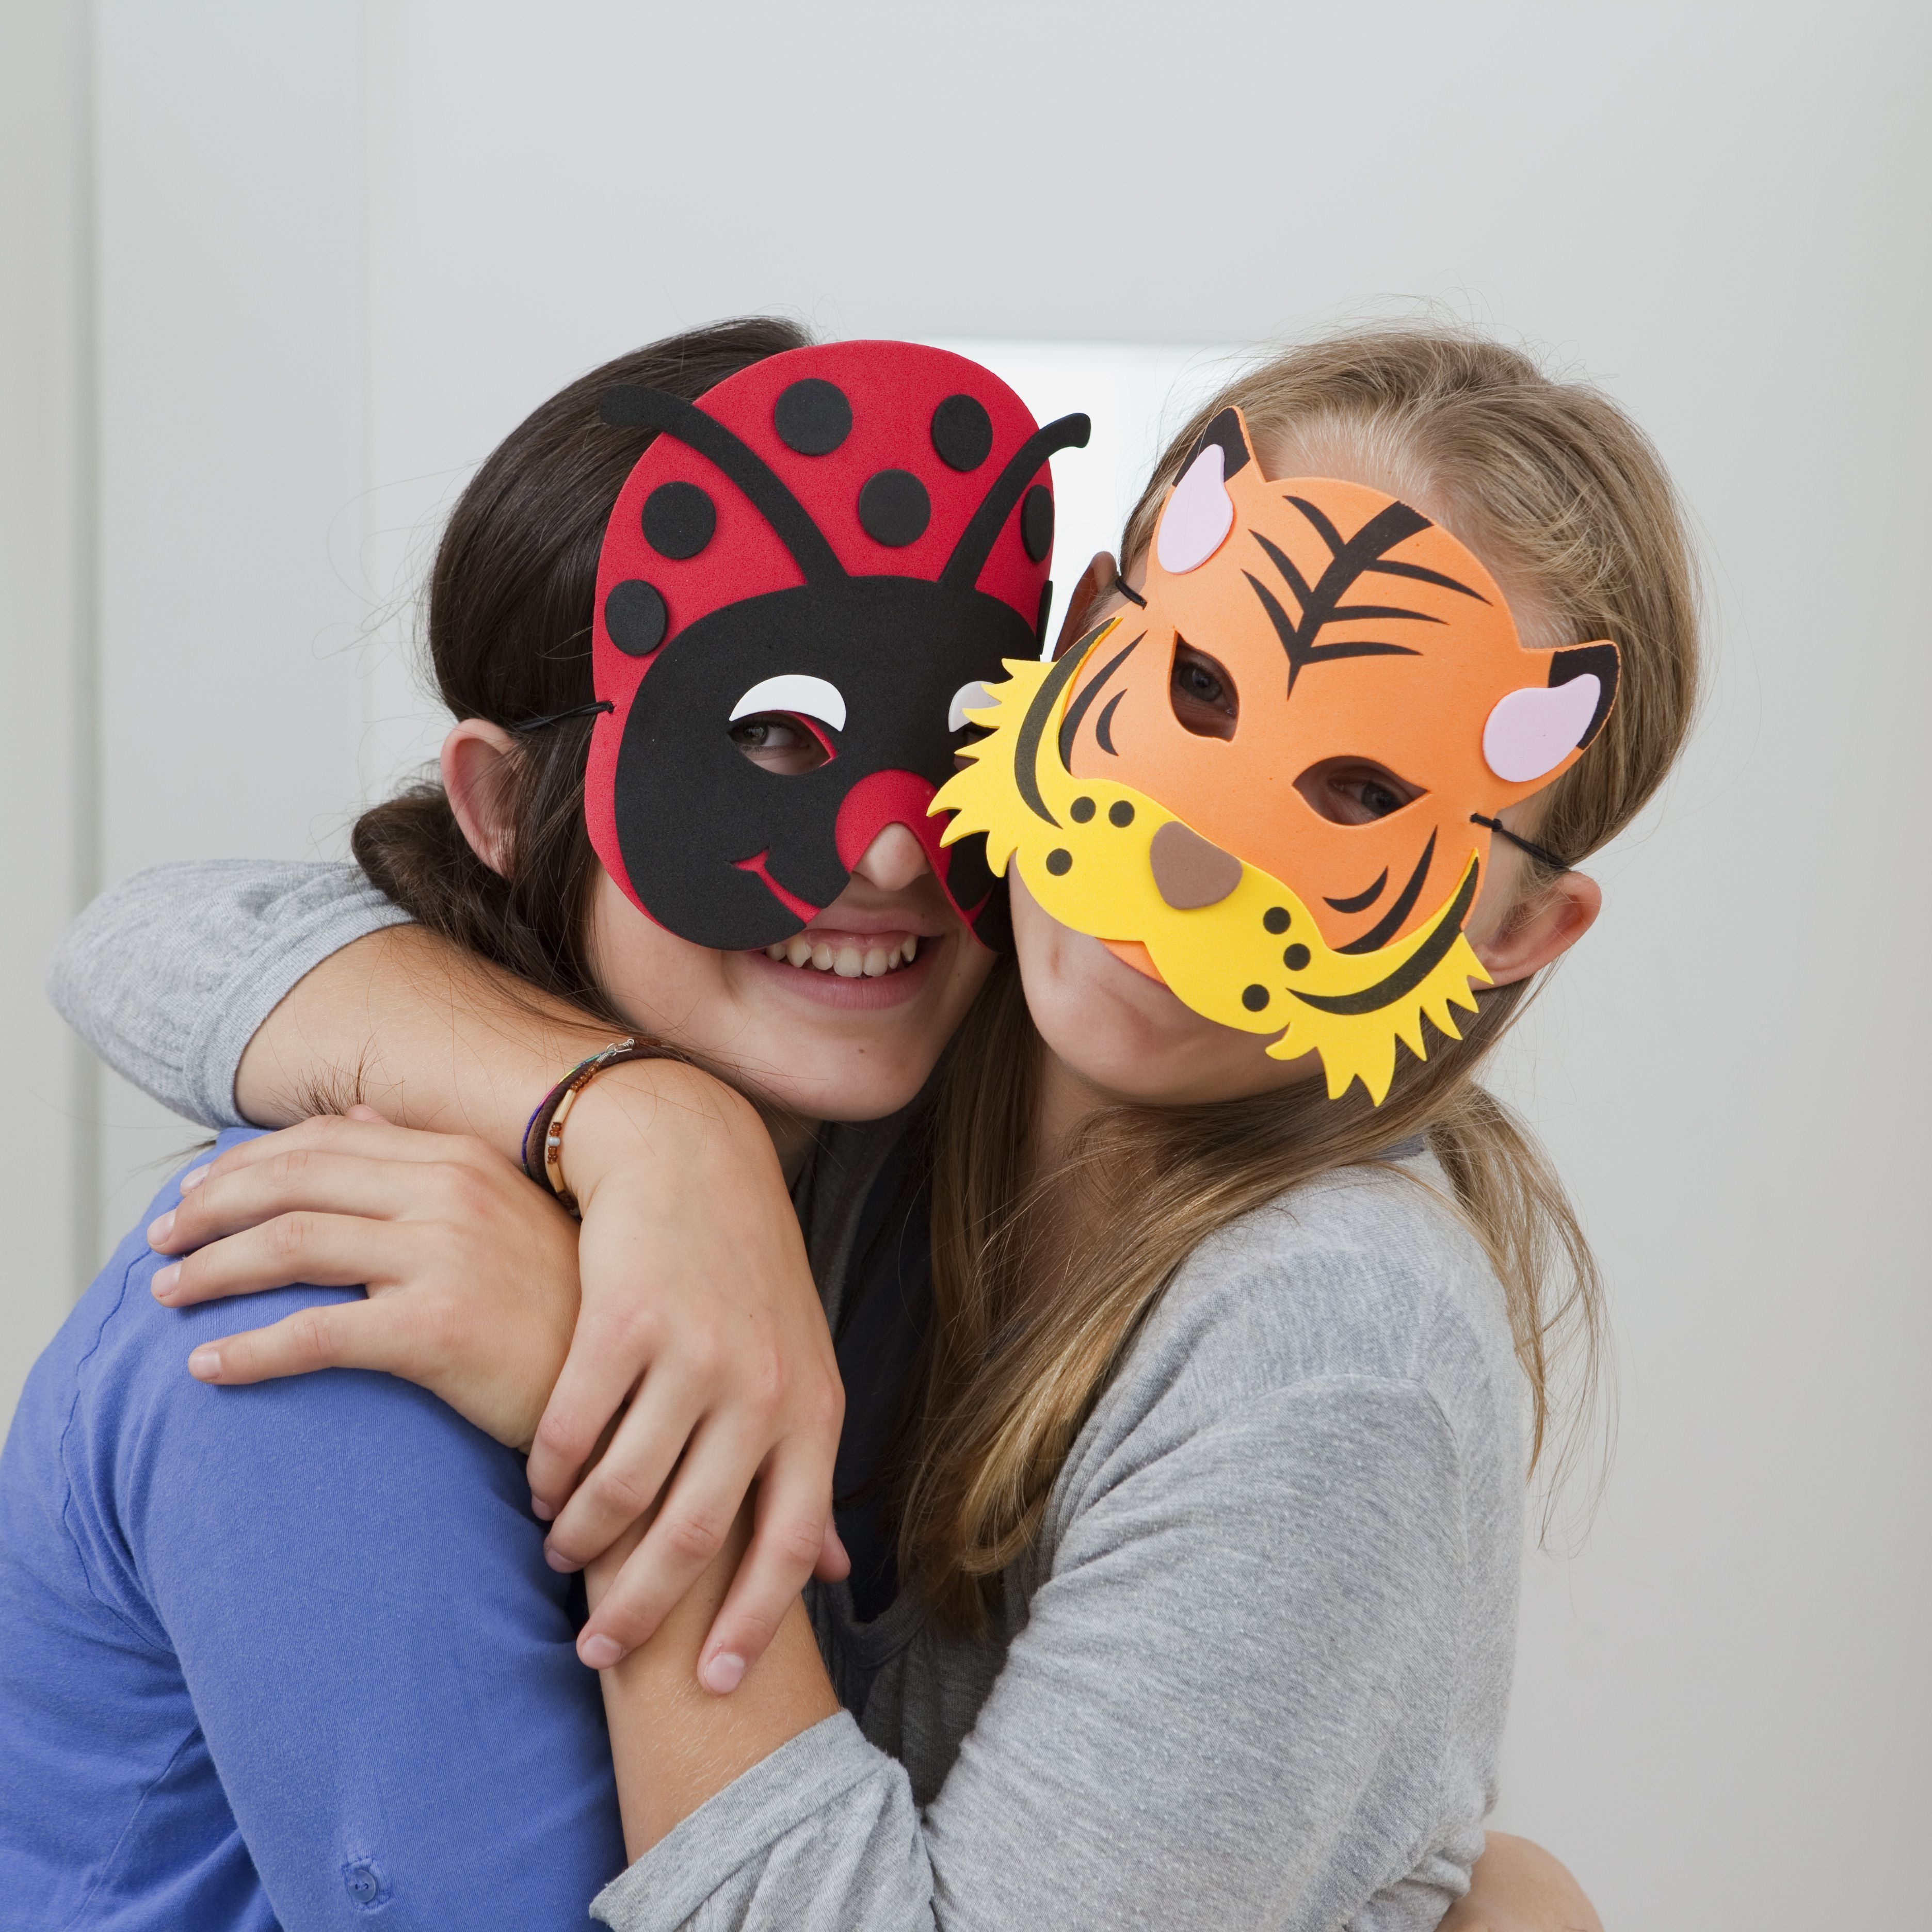 72 Free Printable Halloween Masks For All Ages - Free Printable Halloween Face Masks